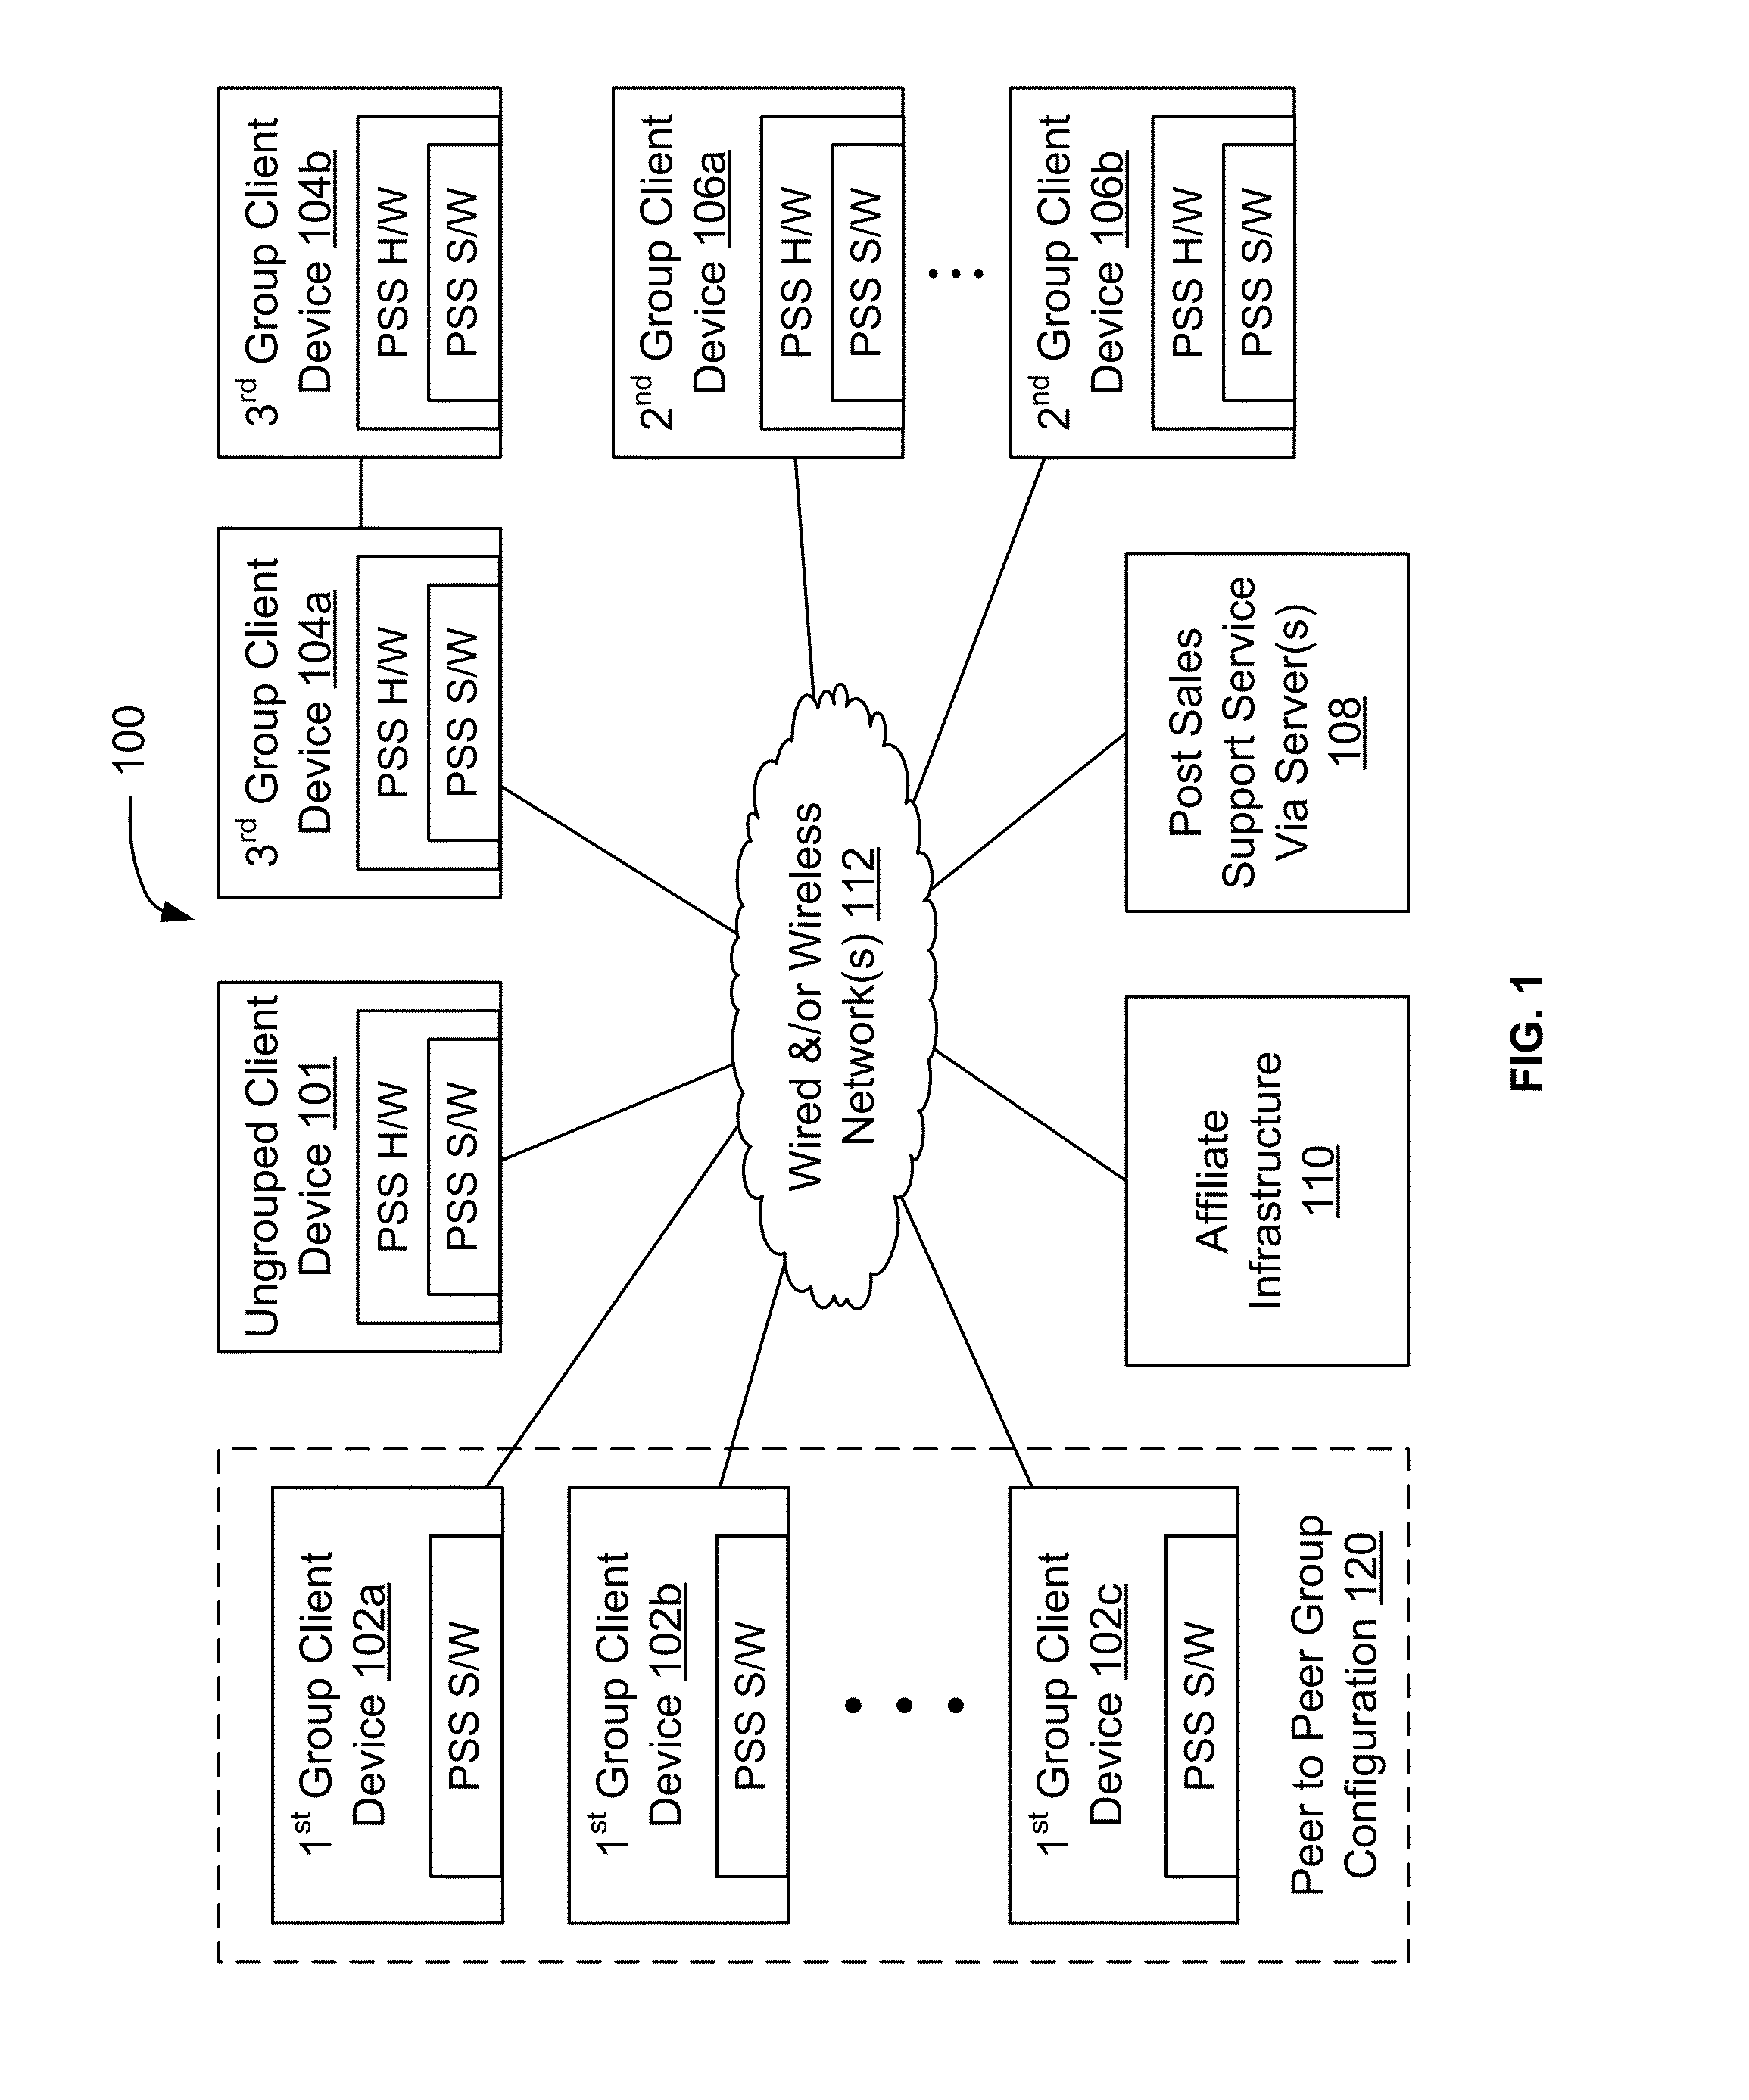 Electronic device post-sale support system